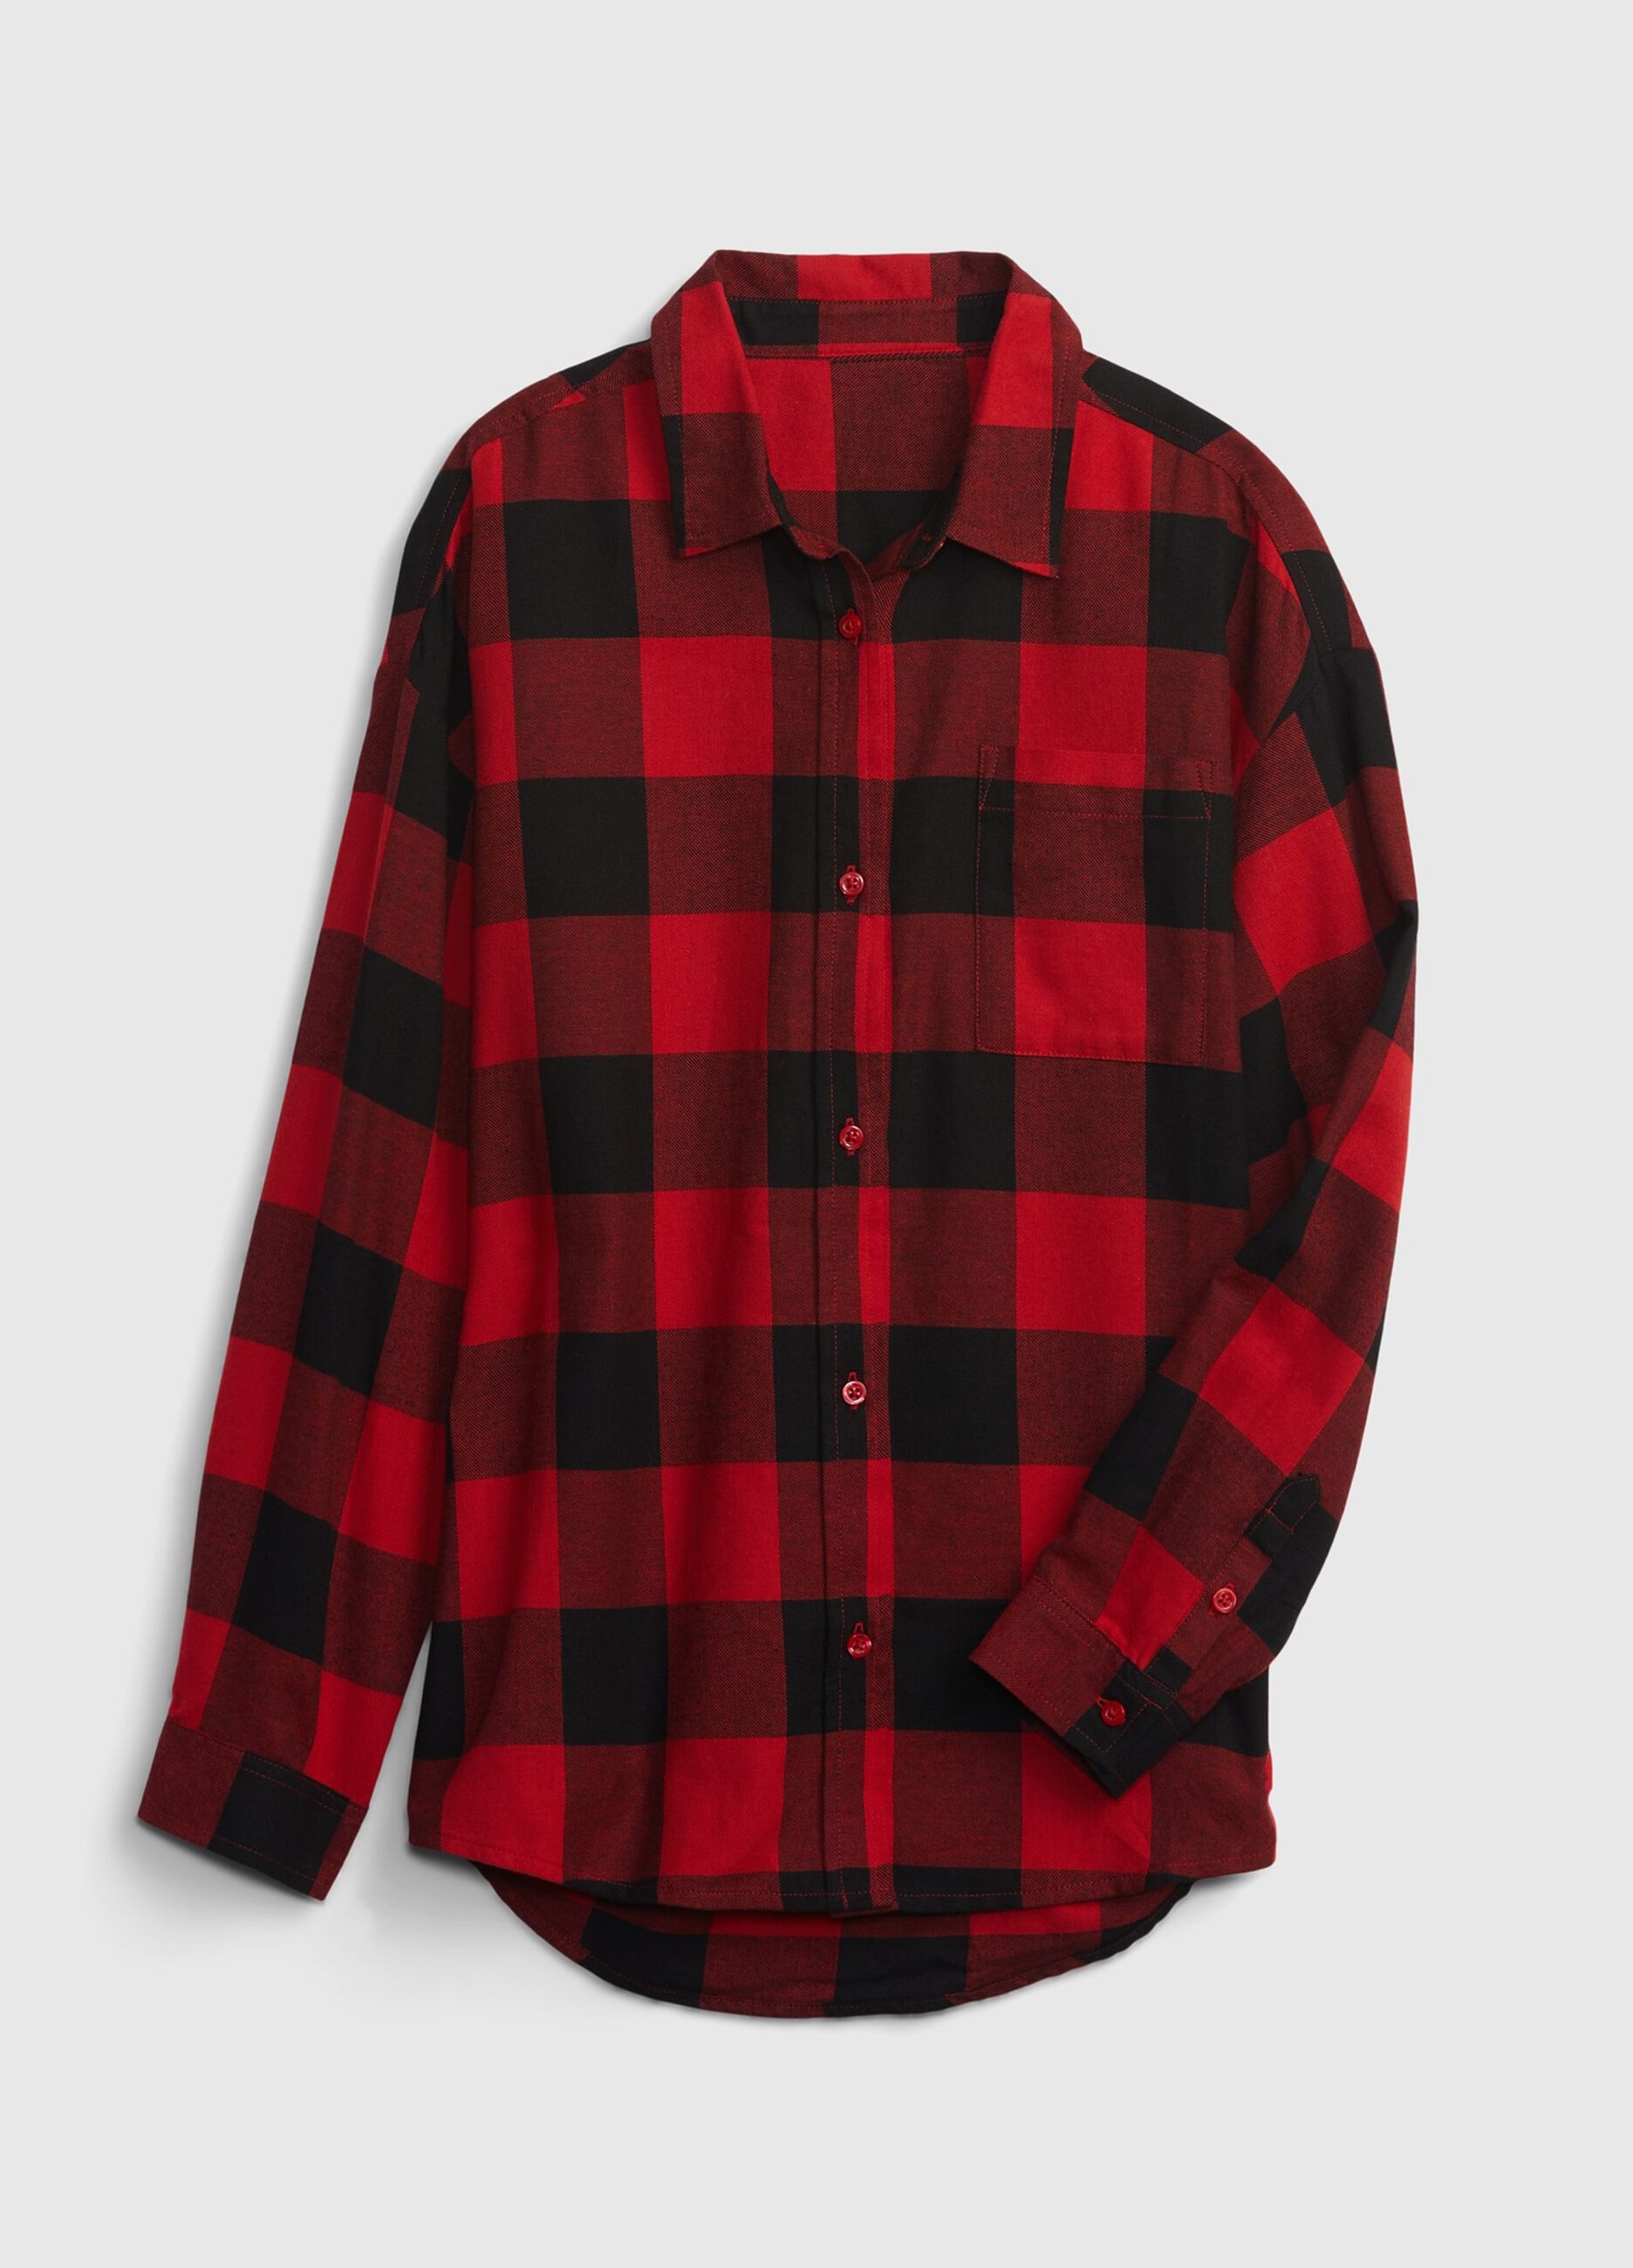 Shirt in check cotton